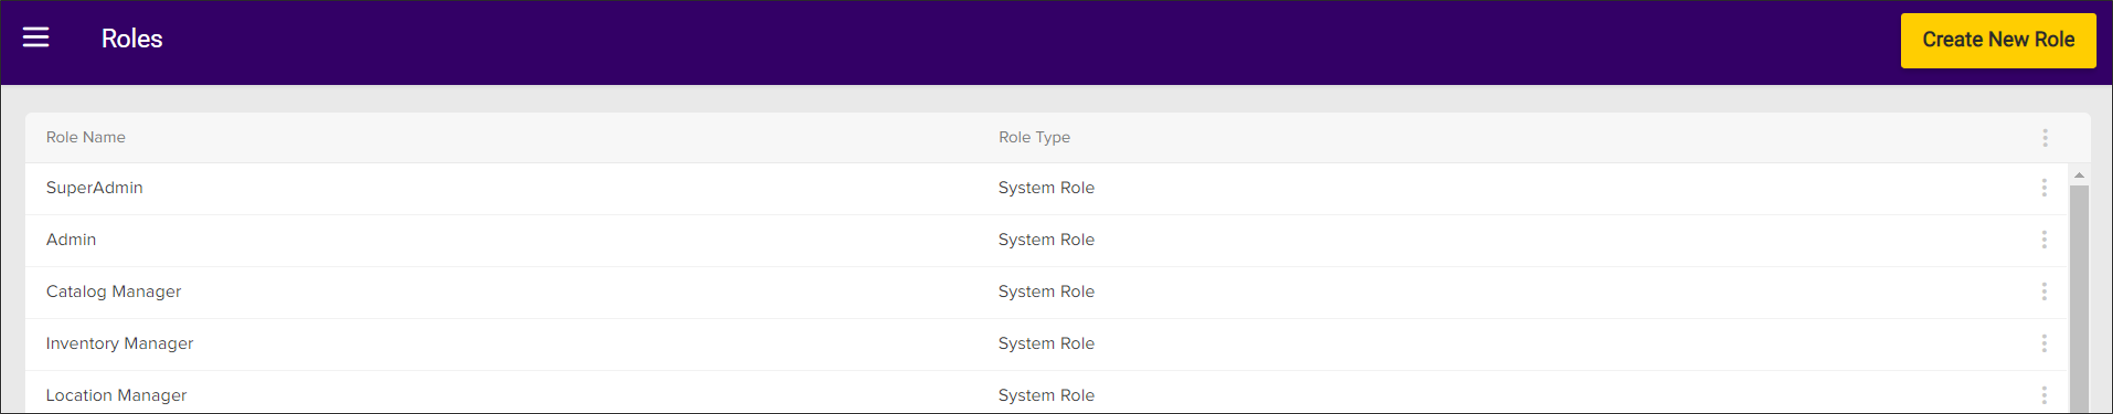 The Roles page